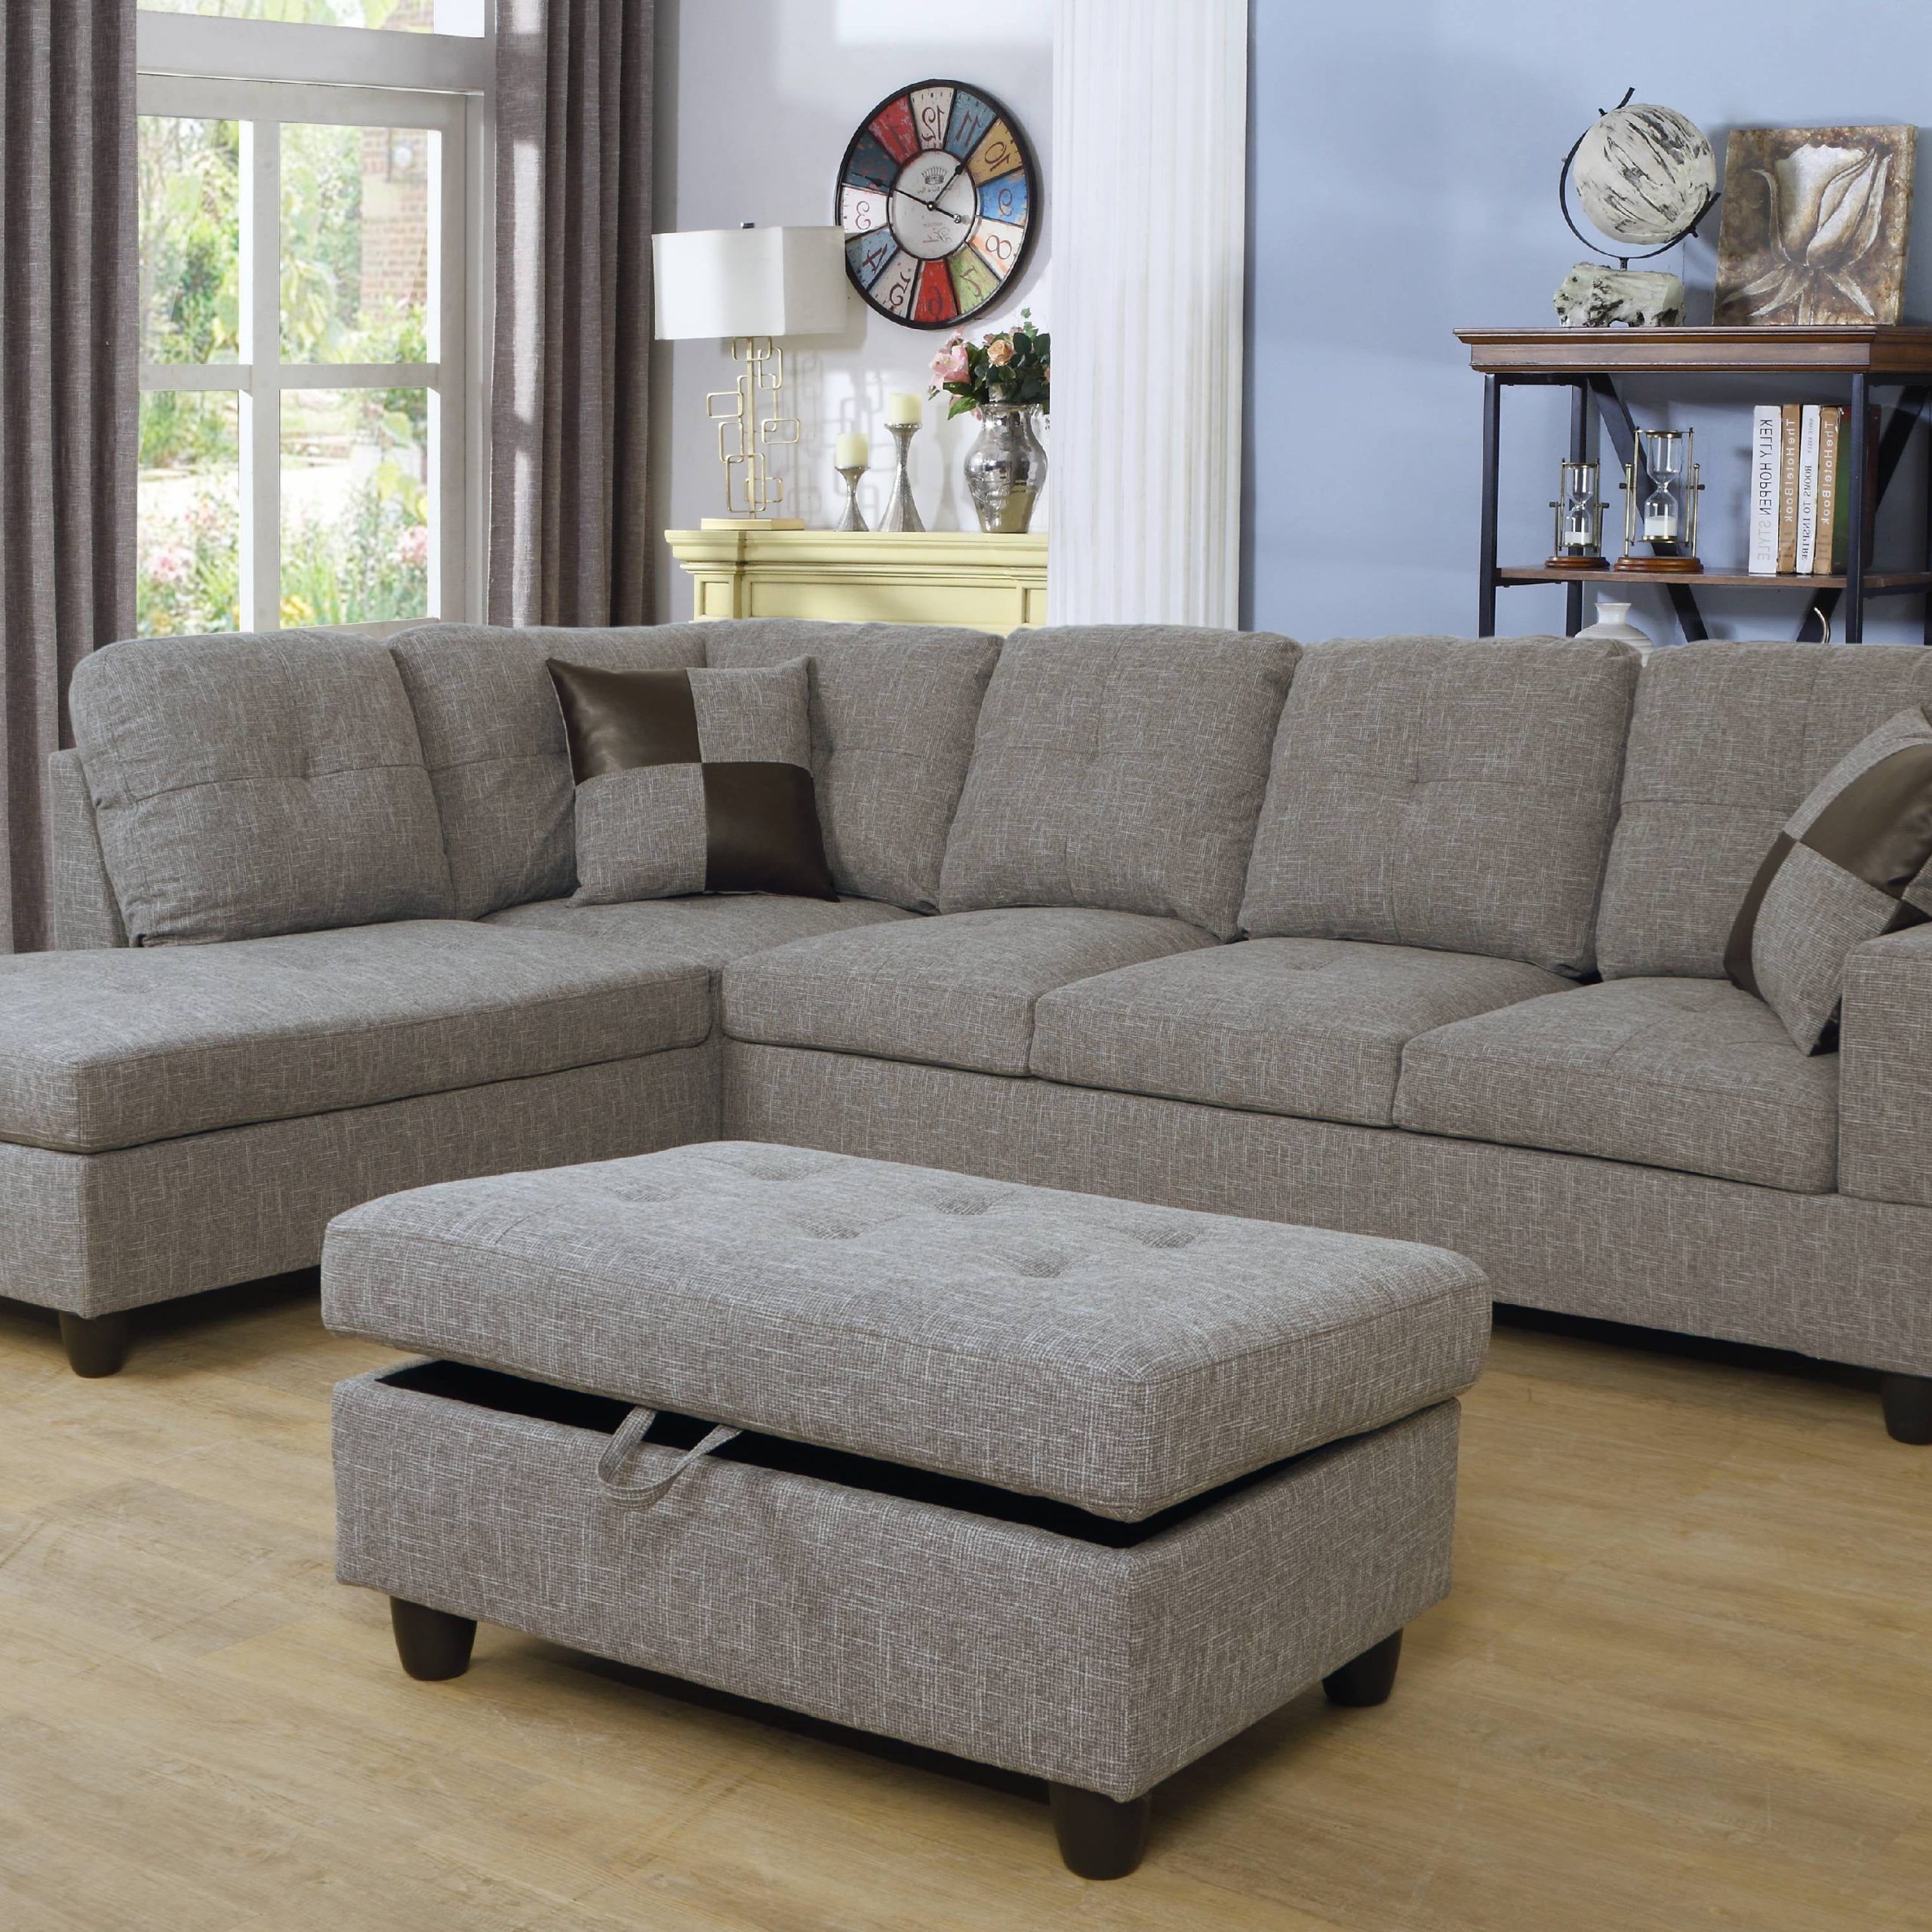 Ashey Furniture – L Shape Sectional Sofa Set With Storage Ottoman Within Sofas With Ottomans (View 12 of 20)